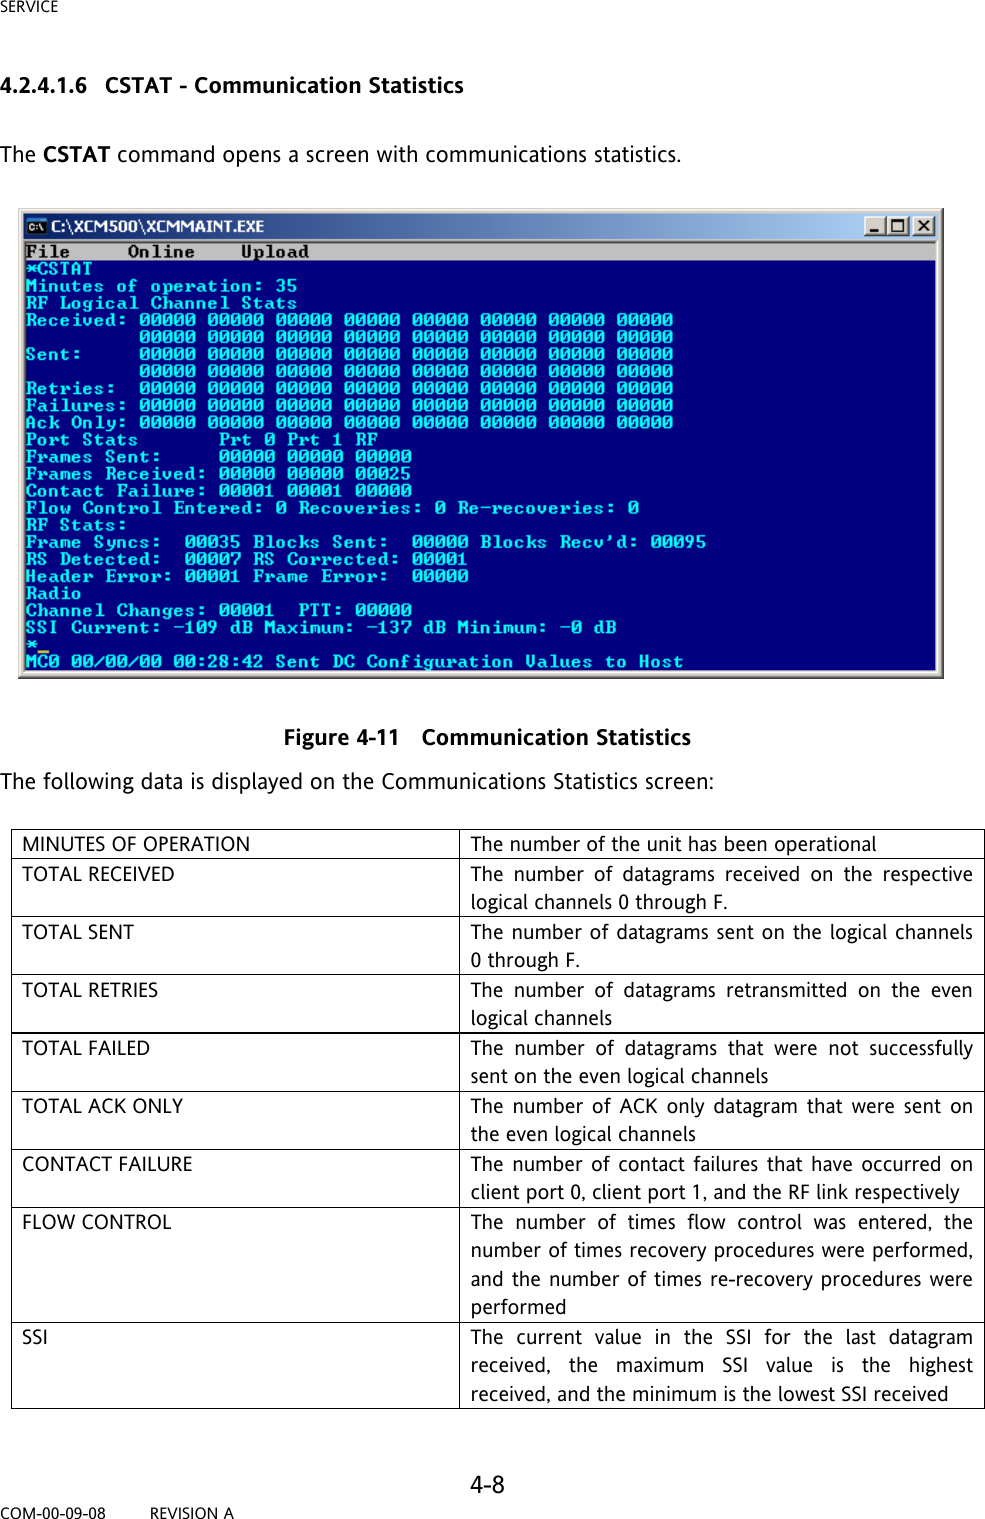 SERVICE     4-8 COM-00-09-08         REVISION A 4.2.4.1.6 CSTAT - Communication Statistics  The CSTAT command opens a screen with communications statistics.    Figure 4-11   Communication Statistics The following data is displayed on the Communications Statistics screen:  MINUTES OF OPERATION  The number of the unit has been operational TOTAL RECEIVED  The number of datagrams received on the respective logical channels 0 through F.  TOTAL SENT  The number of datagrams sent on the logical channels 0 through F. TOTAL RETRIES  The number of datagrams retransmitted on the even logical channels TOTAL FAILED  The number of datagrams that were not successfully sent on the even logical channels TOTAL ACK ONLY  The number of ACK only datagram that were sent on the even logical channels CONTACT FAILURE  The number of contact failures that have occurred on client port 0, client port 1, and the RF link respectively FLOW CONTROL  The number of times flow control was entered, the number of times recovery procedures were performed, and the number of times re-recovery procedures were performed SSI  The current value in the SSI for the last datagram received, the maximum SSI value is the highest received, and the minimum is the lowest SSI received  